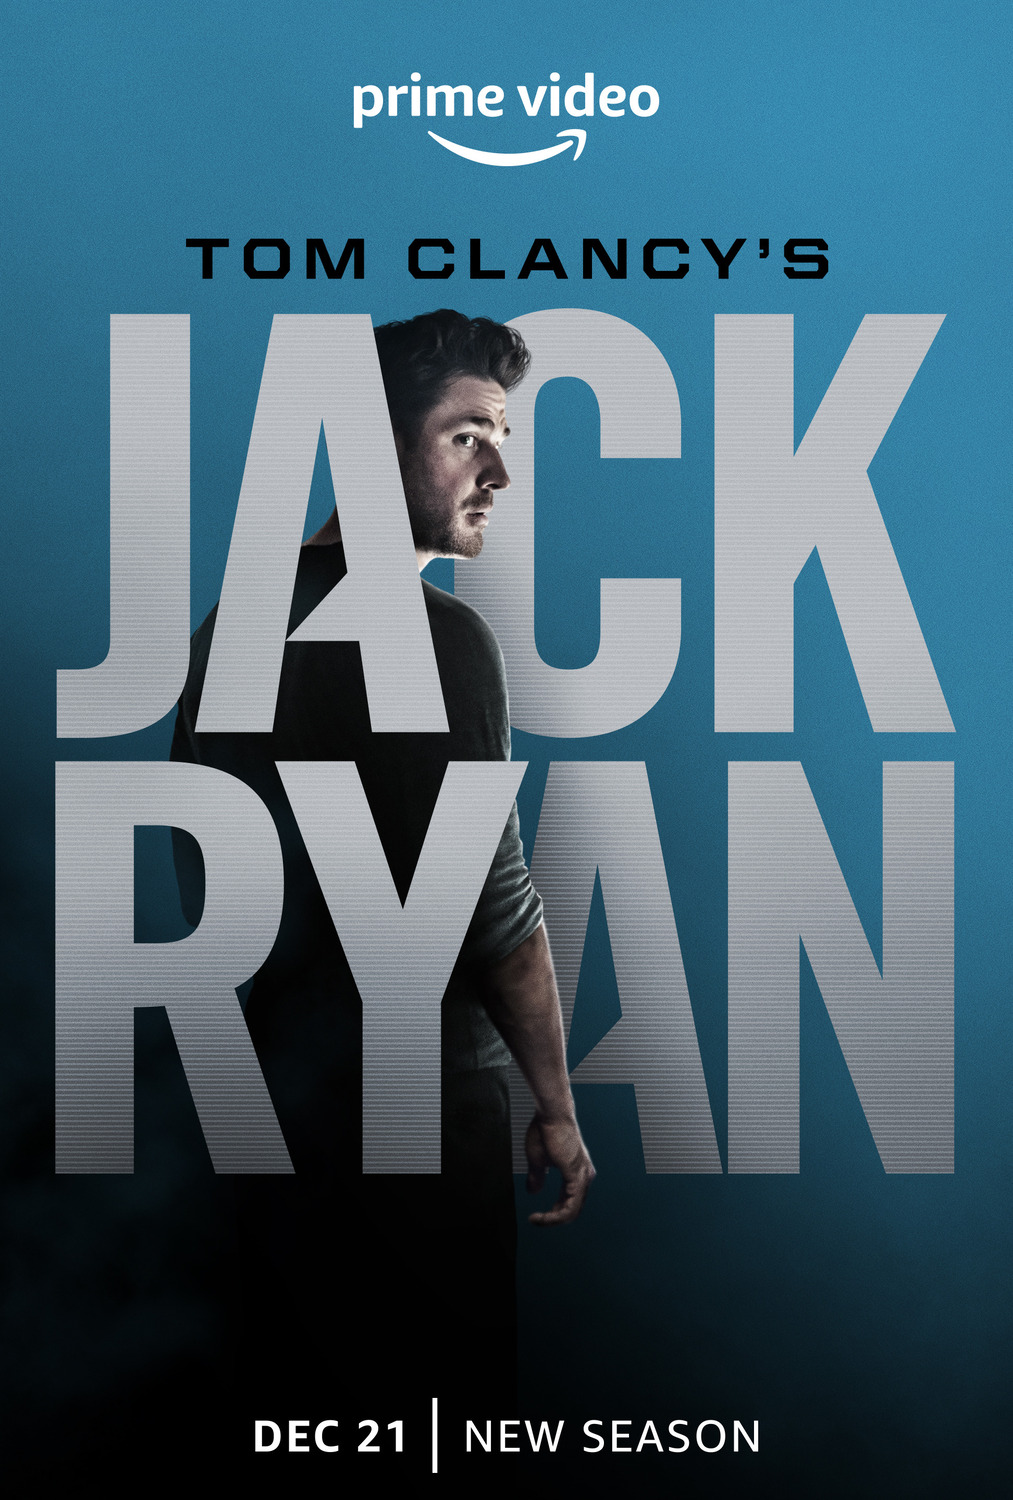 Extra Large TV Poster Image for Tom Clancy's Jack Ryan (#7 of 13)